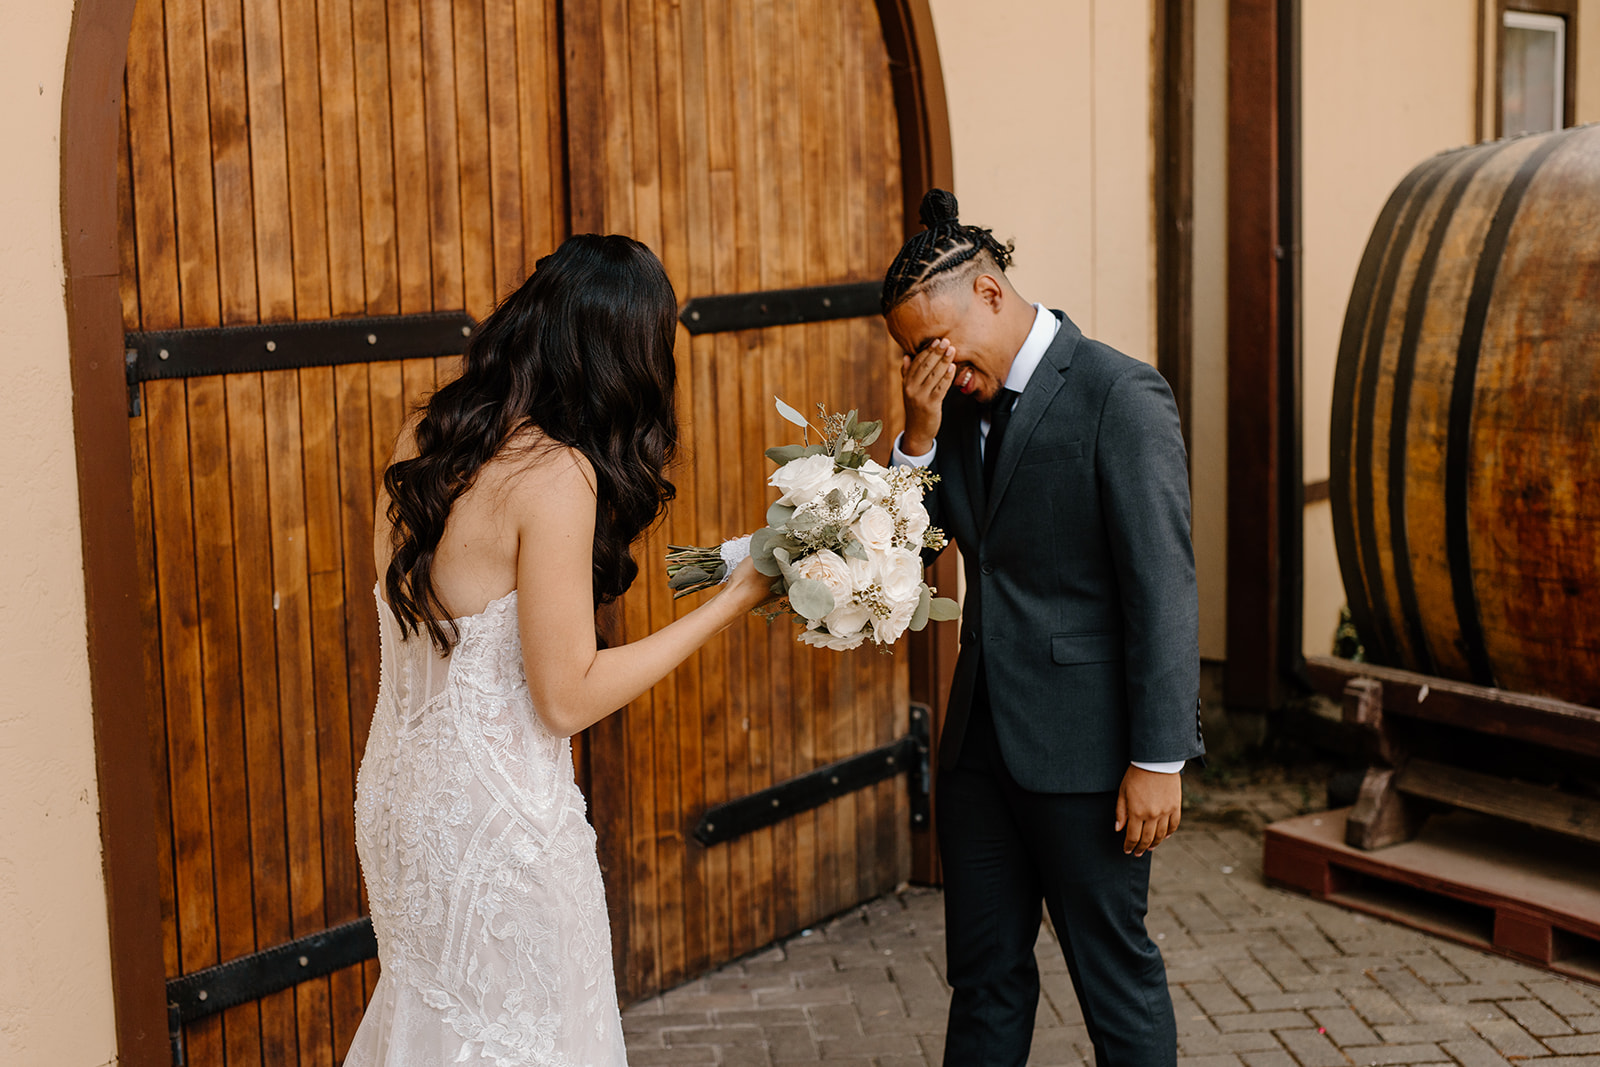 This couple had their first look in front of a winery, to say the least it was very emotional.